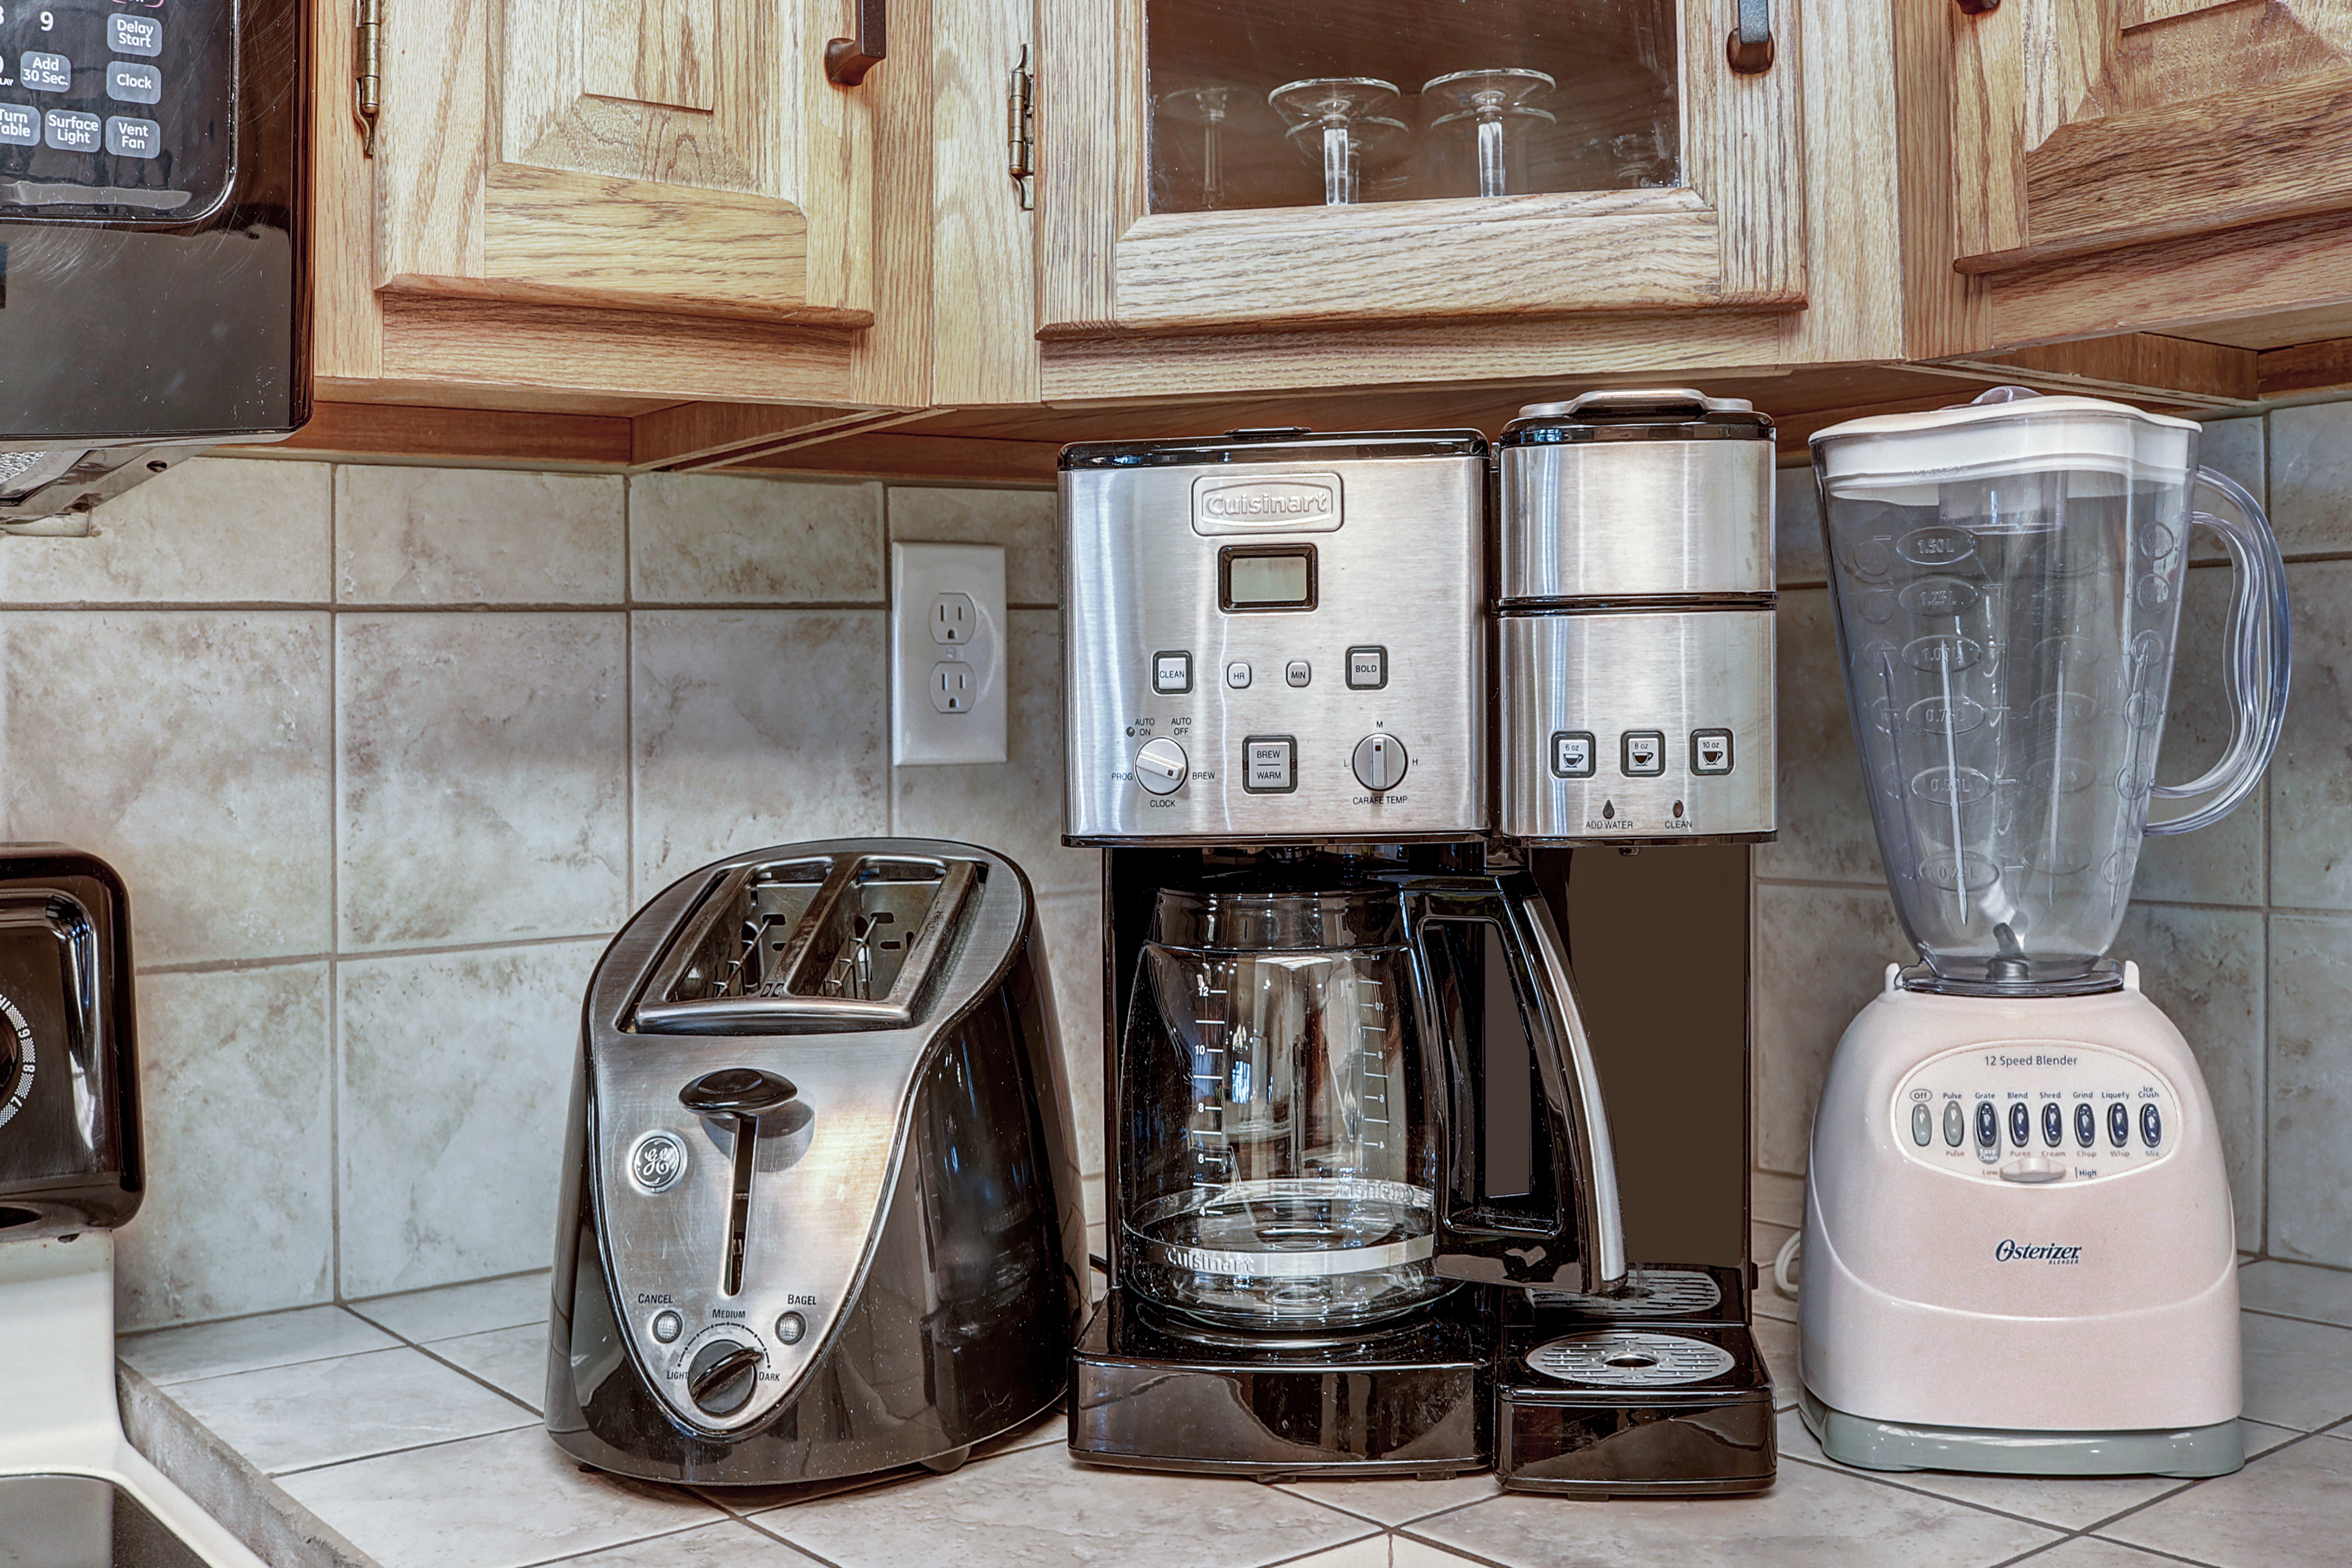 Small appliances include coffee maker, toaster, blender and slow cooker - Atrium 108 Breckenridge Vacation Rental